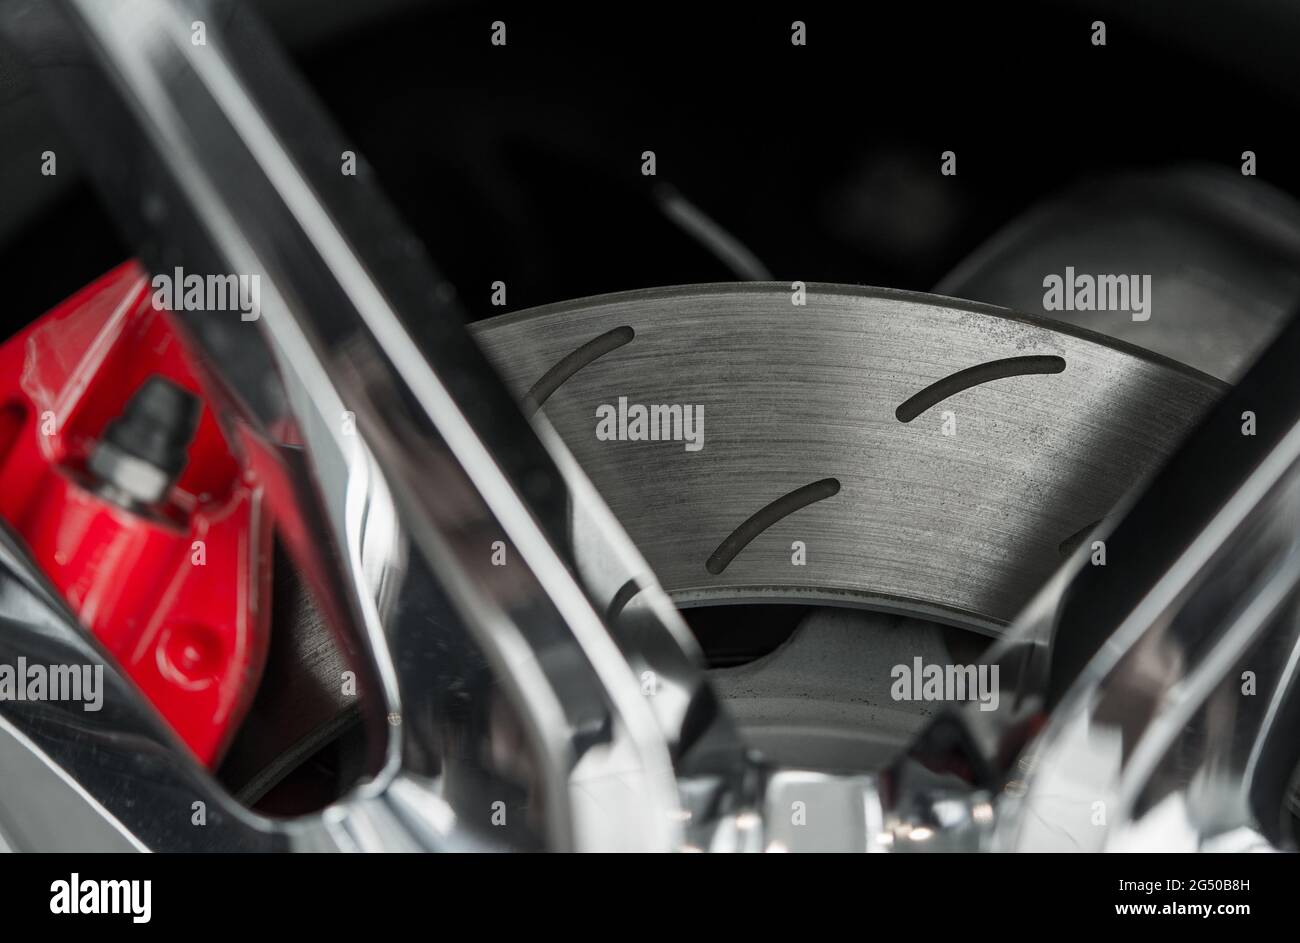 Automotive Industry Theme. Modern Car Brake Disc with Red Caliper Close Up Photo. Performance Vehicle Brakes. Stock Photo